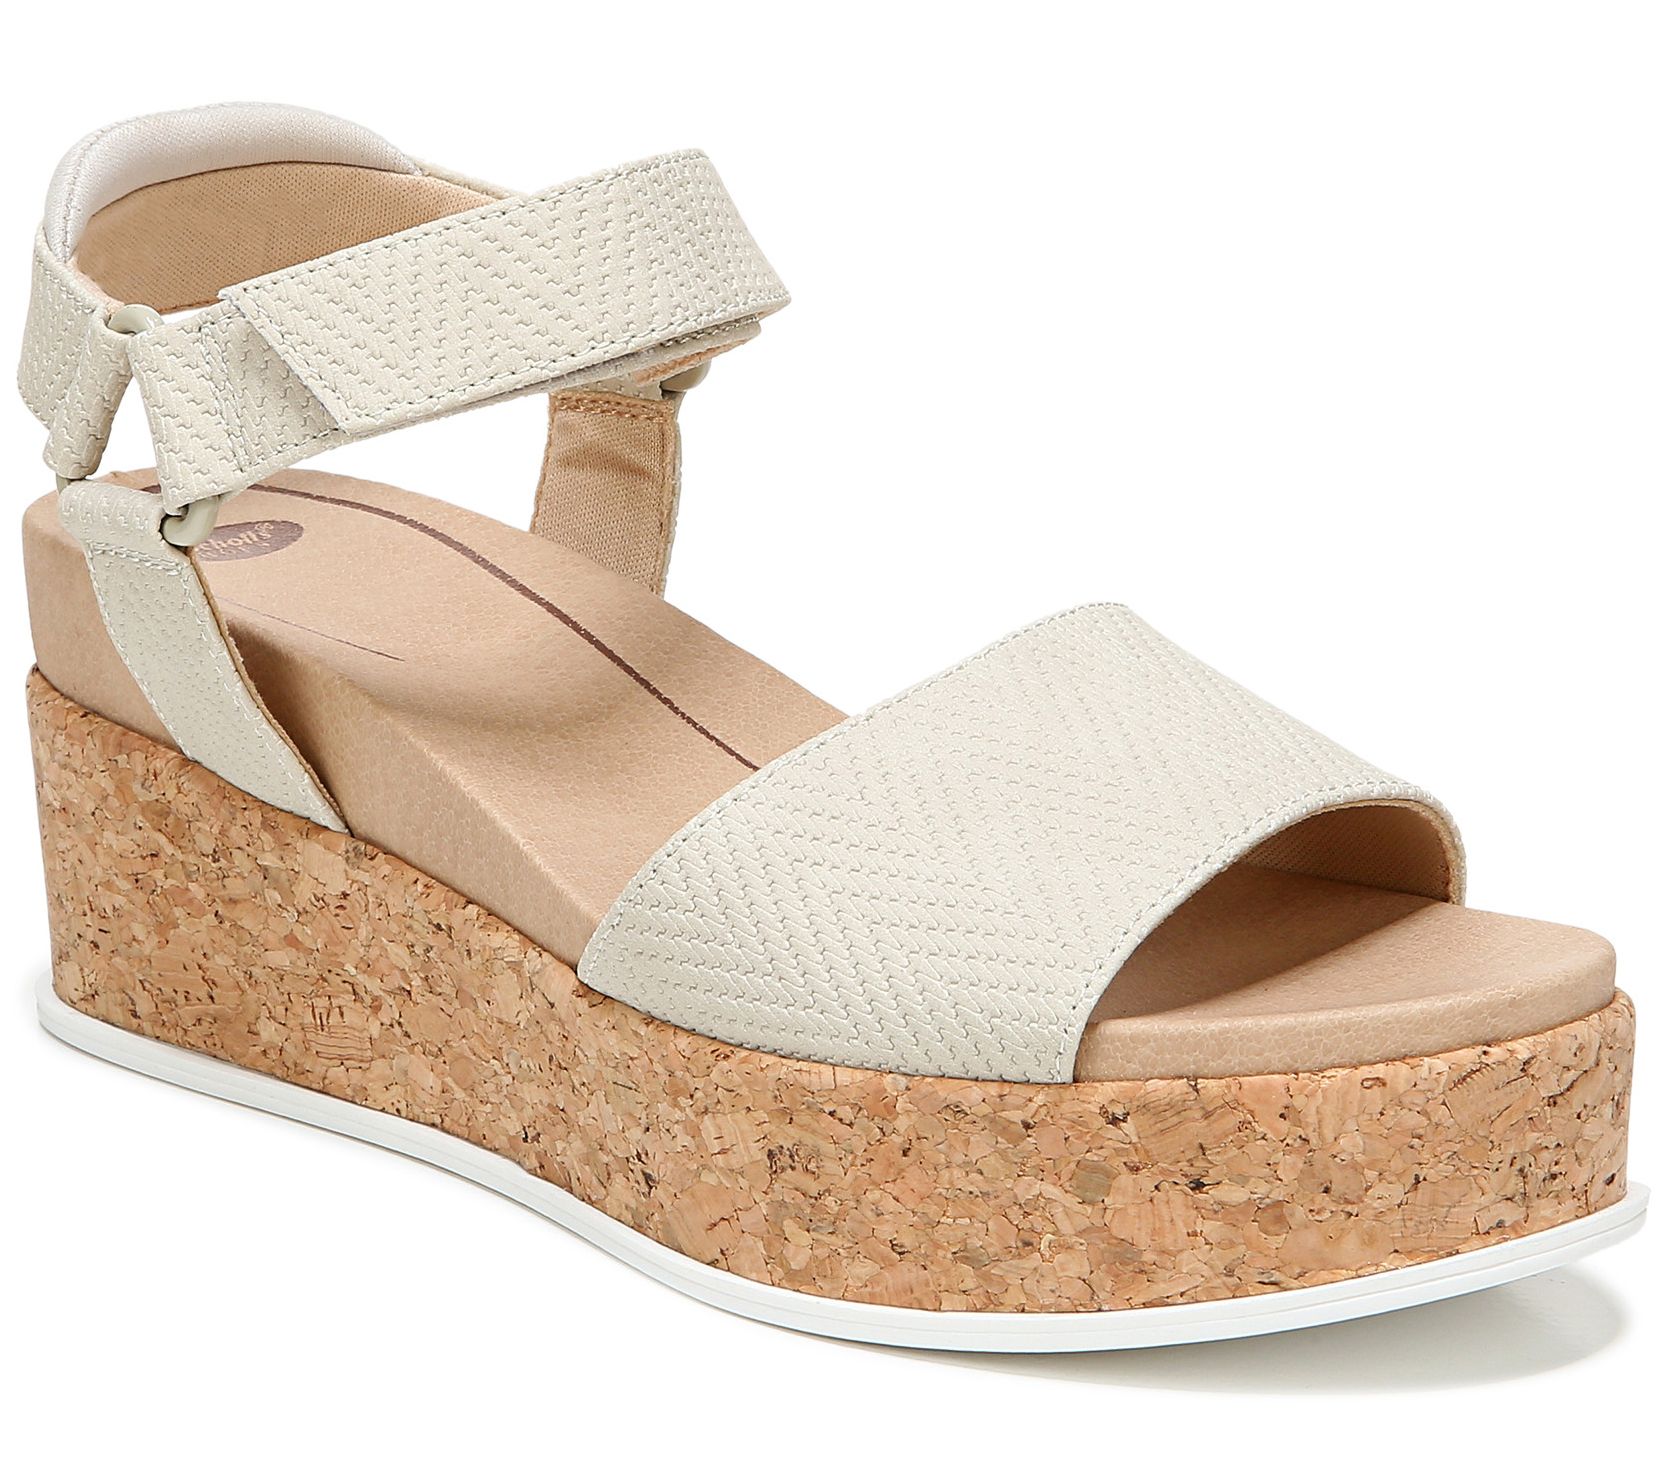 Dr. Scholl's Cushioned-Strap Platform Wedges -Beaming - QVC.com